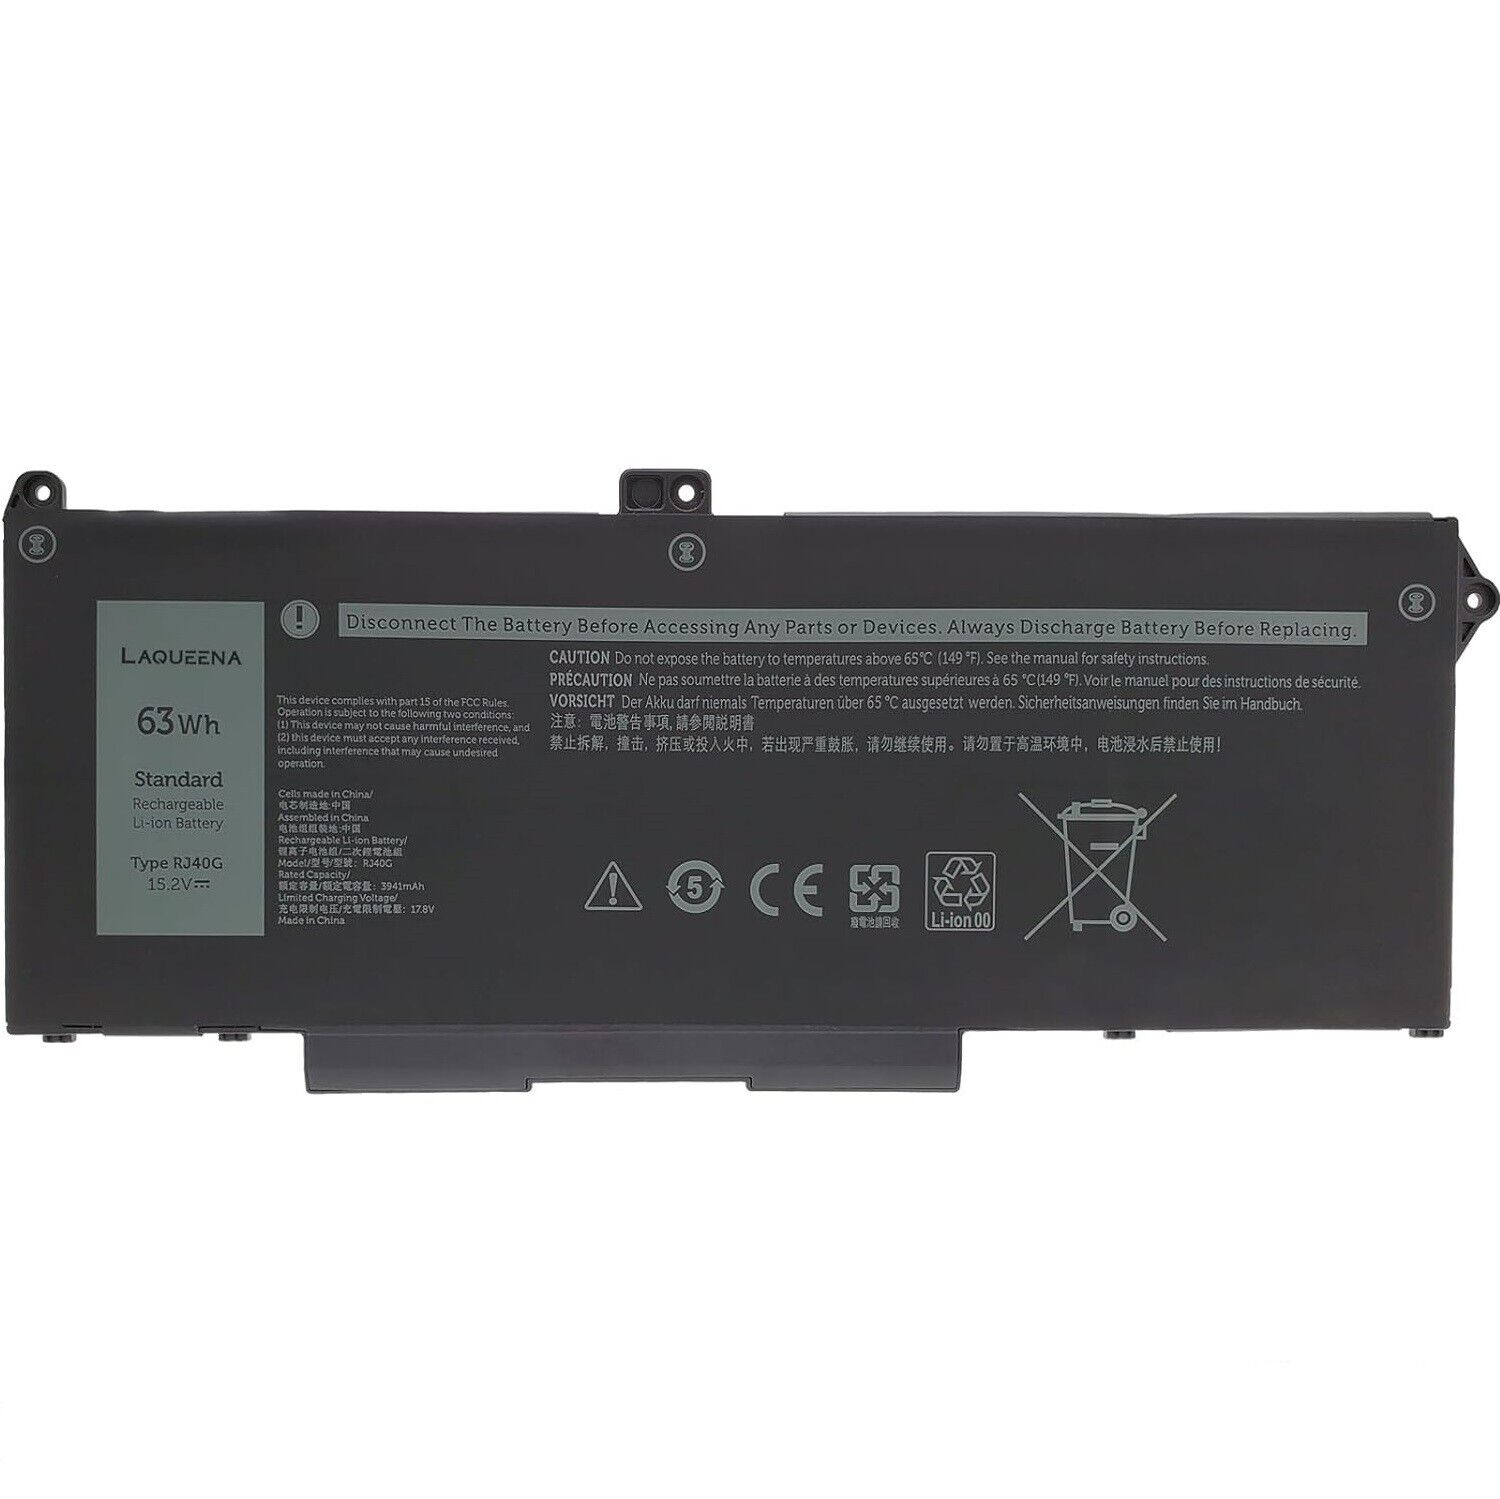 RJ40G Battery for Dell Latitude 5420 5520 Precision 3560 01K2CF 075X16 WY9DX